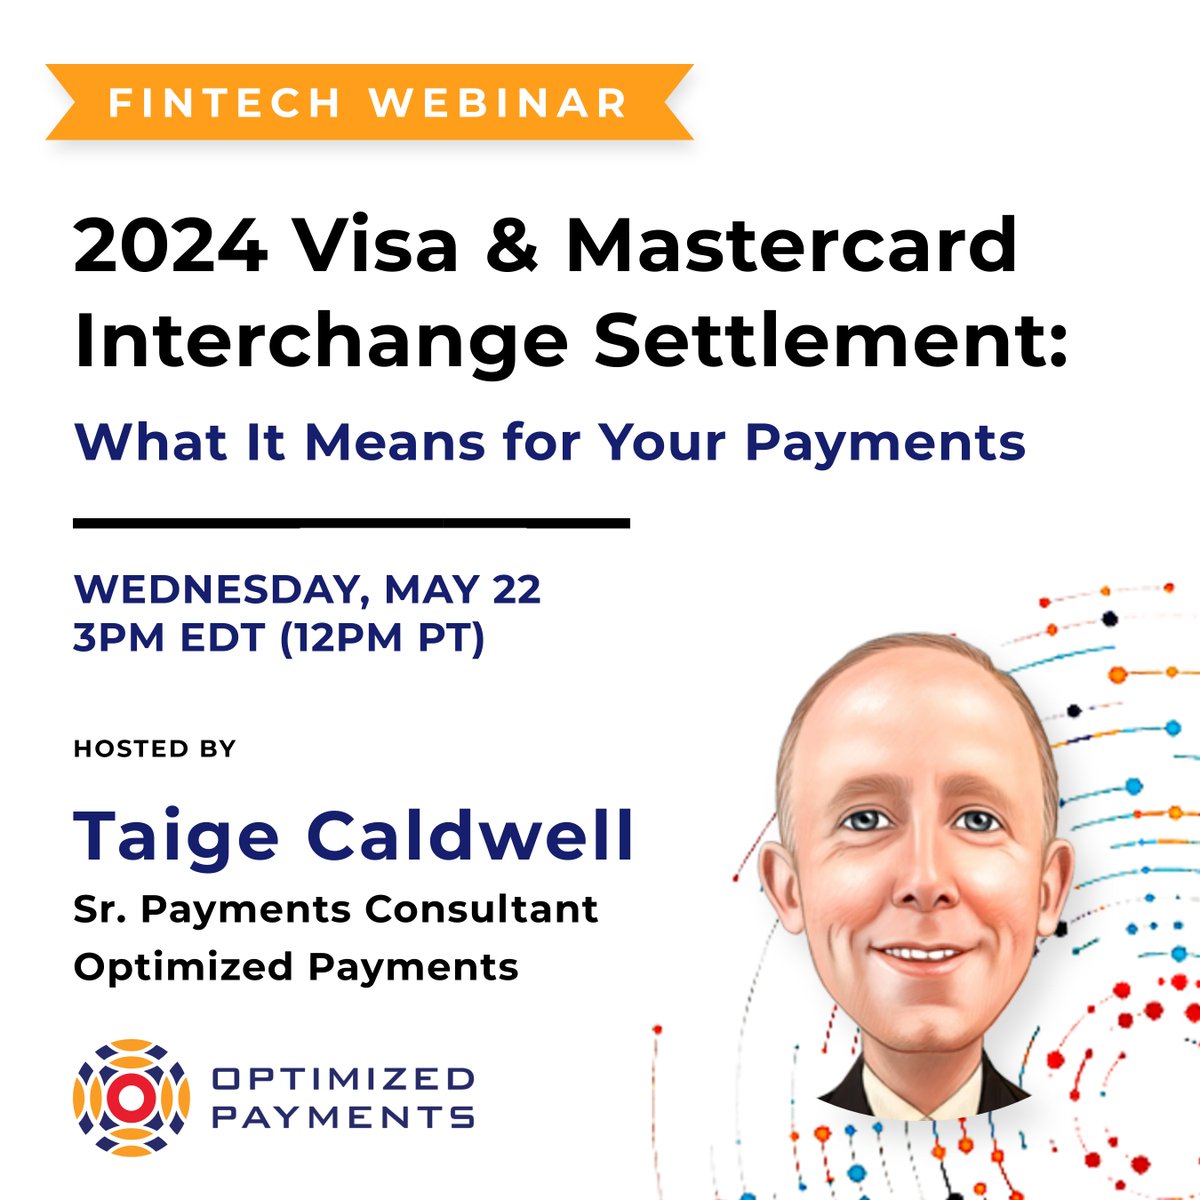 In just a few weeks our payment expert, Taige Caldwell, will be leading a free-to-attend session on the game-changing effects of the recent major Visa/Mastercard Settlement. Join us on May 22nd at 3PM (EDT) REGISTER: buff.ly/3woBCBg #optimizedpayments #fintechwebinar